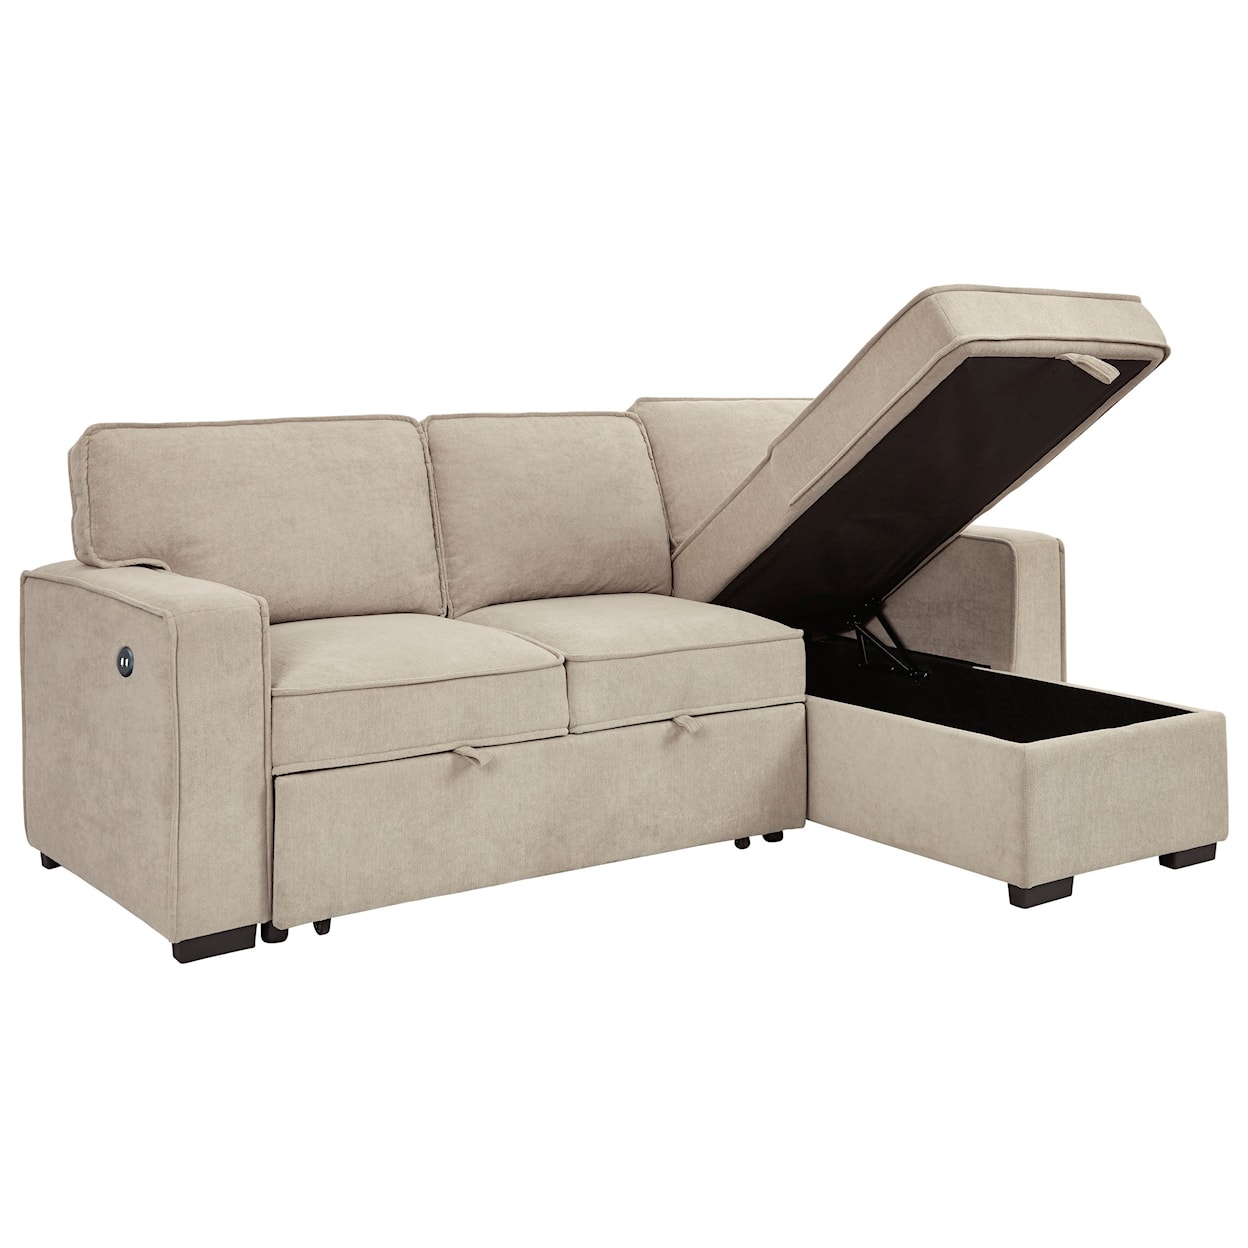 Signature Design by Ashley Darton Sofa Chaise with Pop Up Bed & Storage Chaise